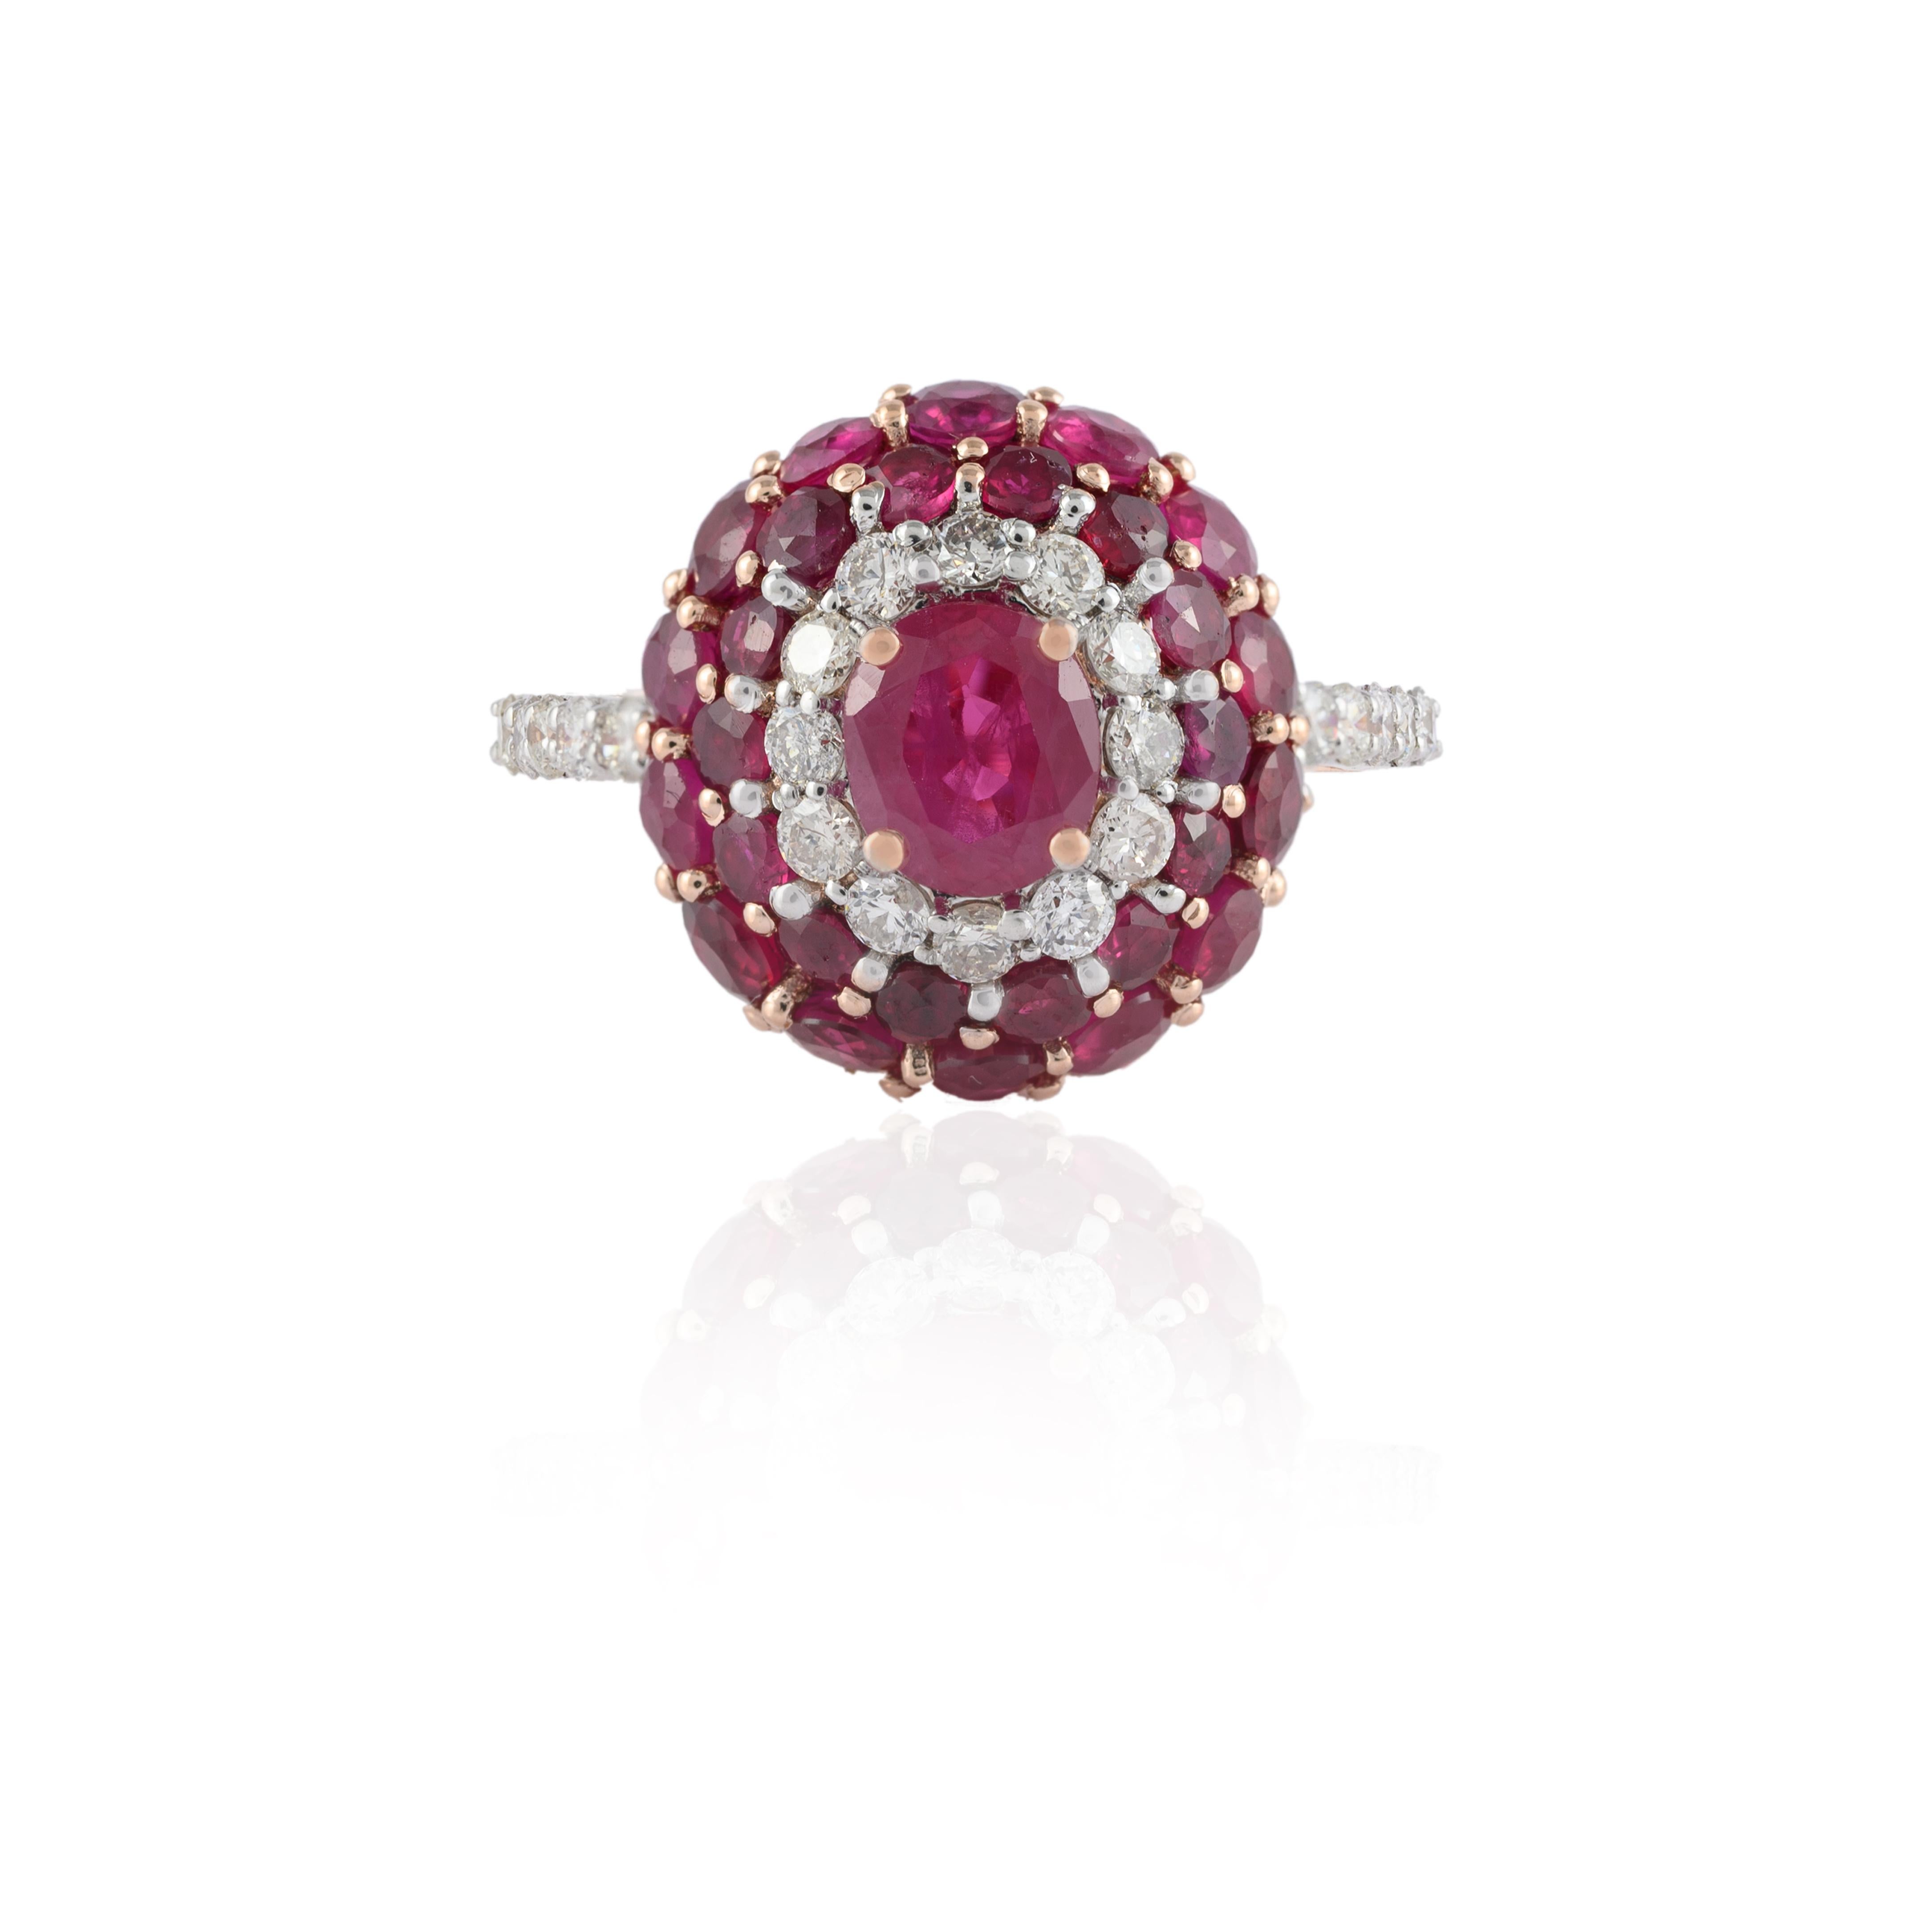 For Sale:  2.76 Carat Natural Ruby Cluster Ring in 14k Solid Rose Gold with Diamonds 2